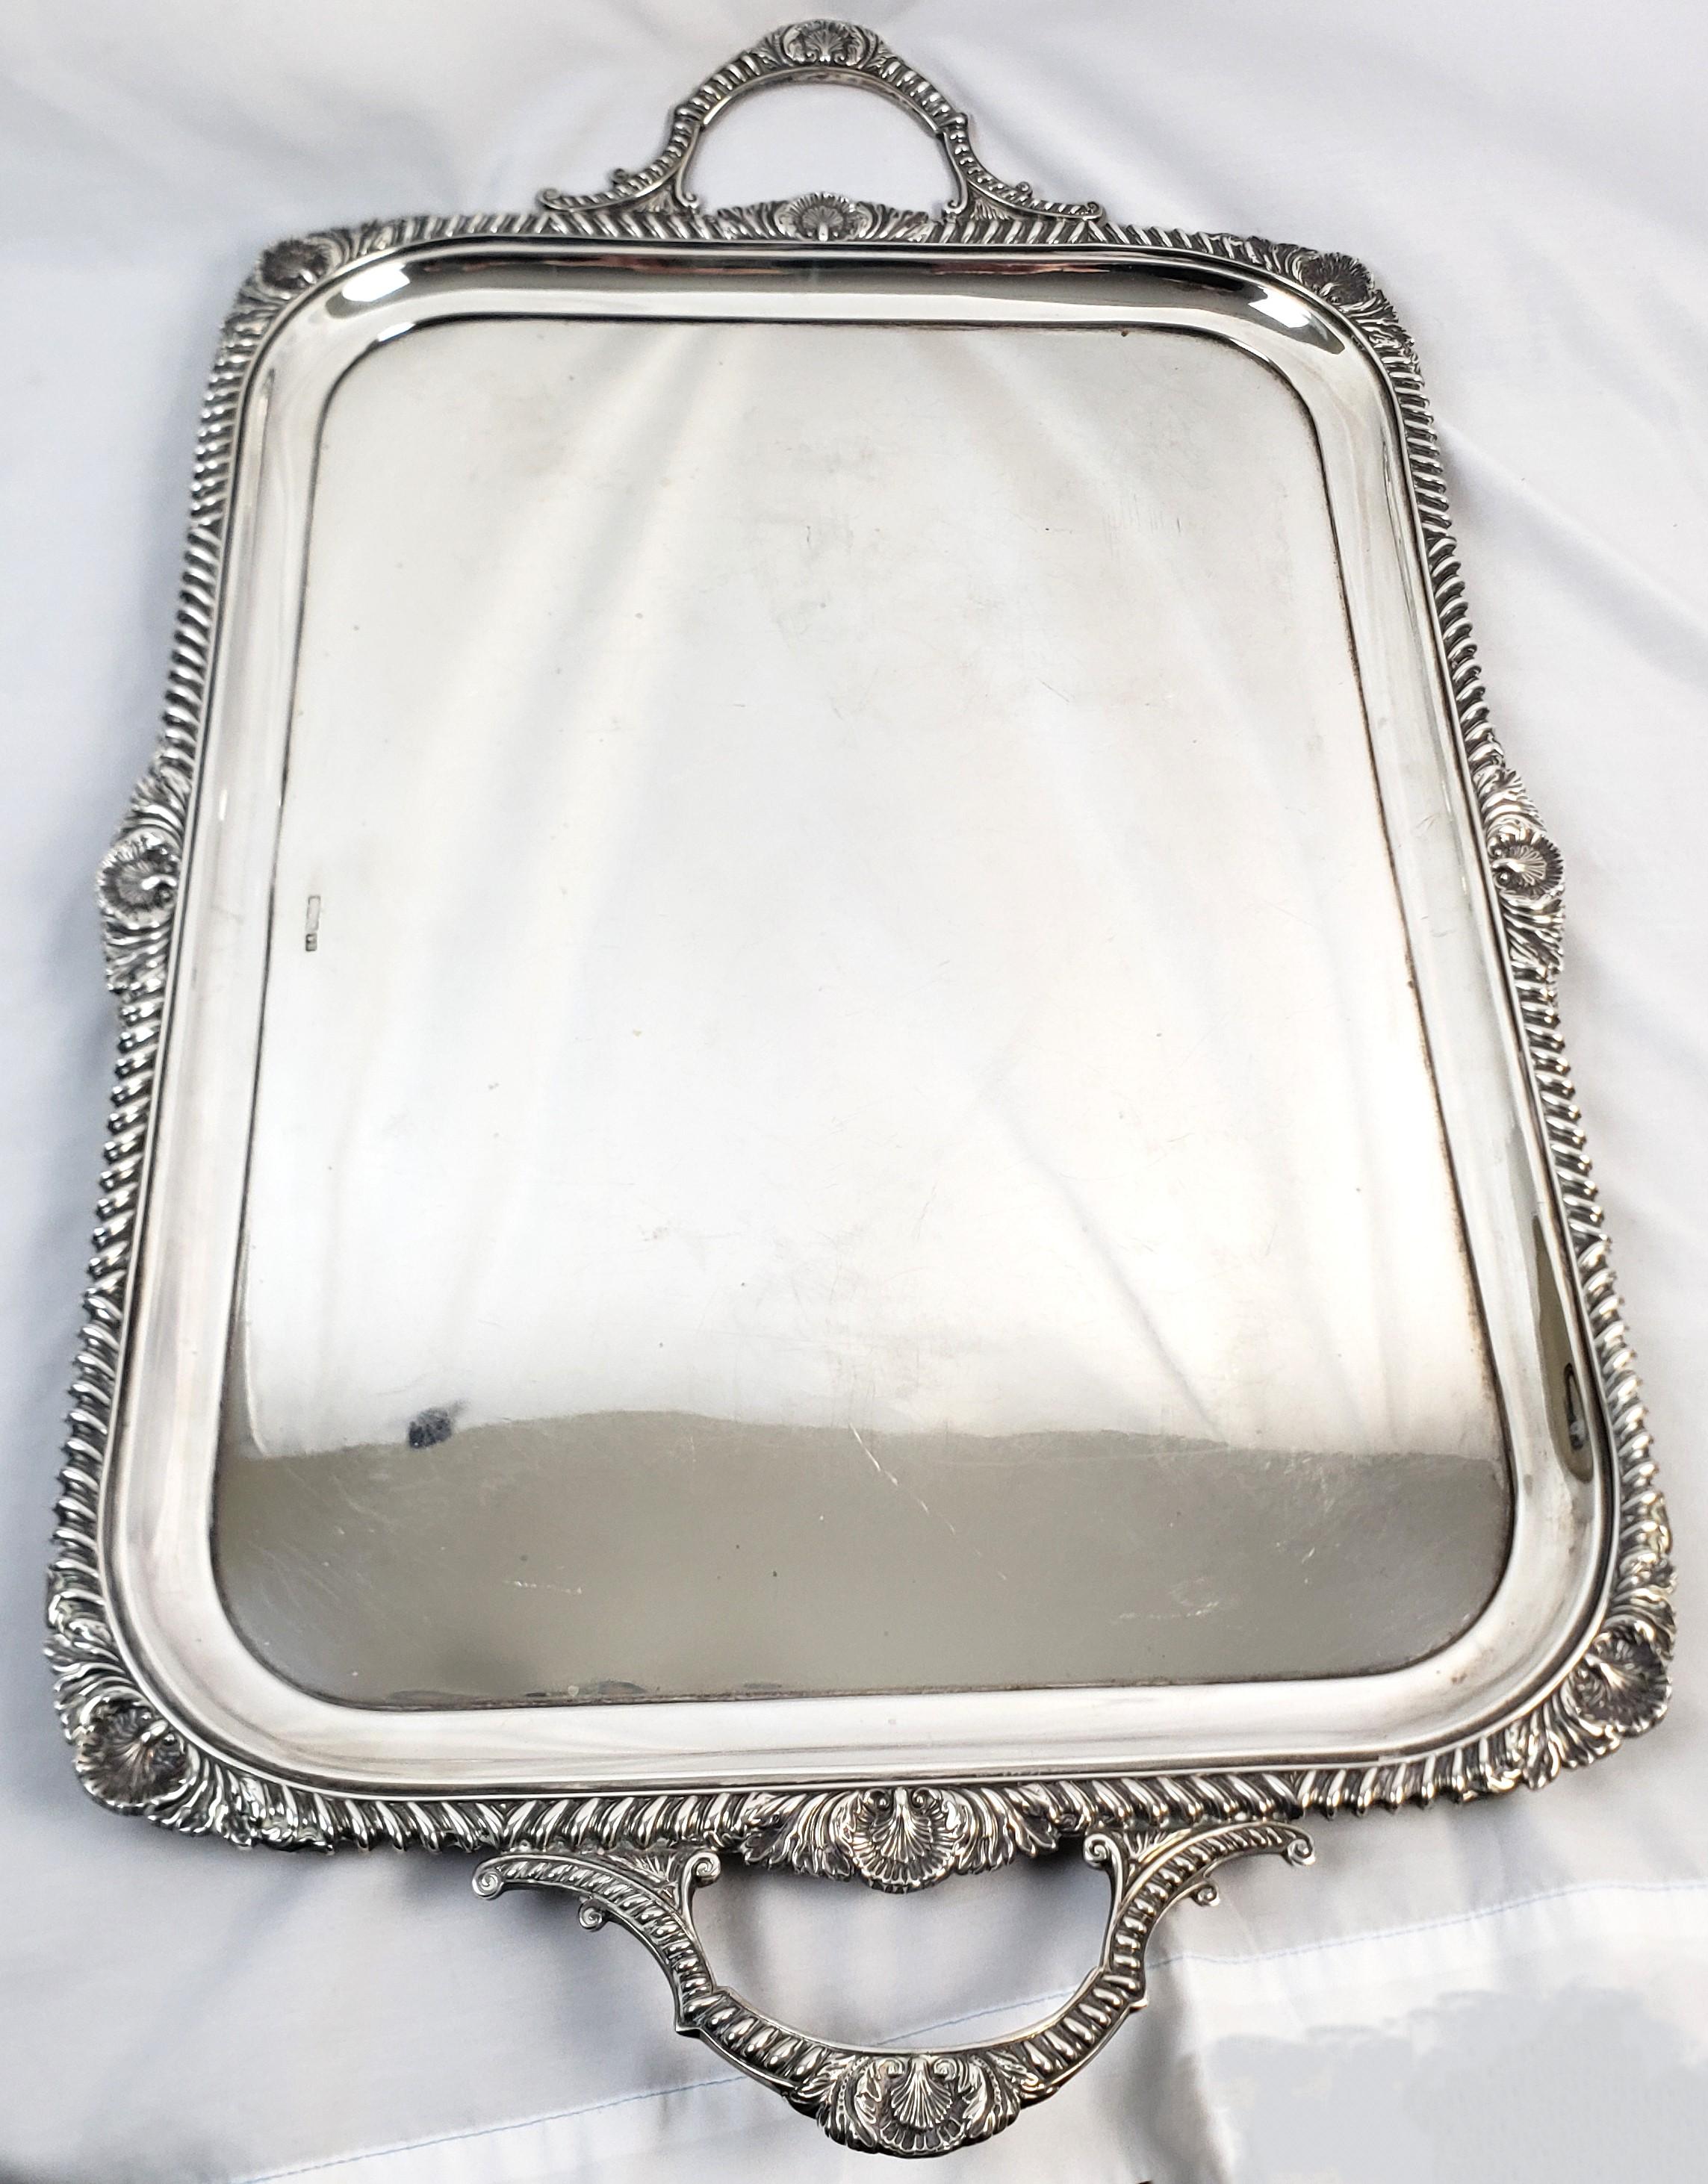 Large Antique Sterling Silver Edwardian Serving Tray with Stylized Rope Border For Sale 1